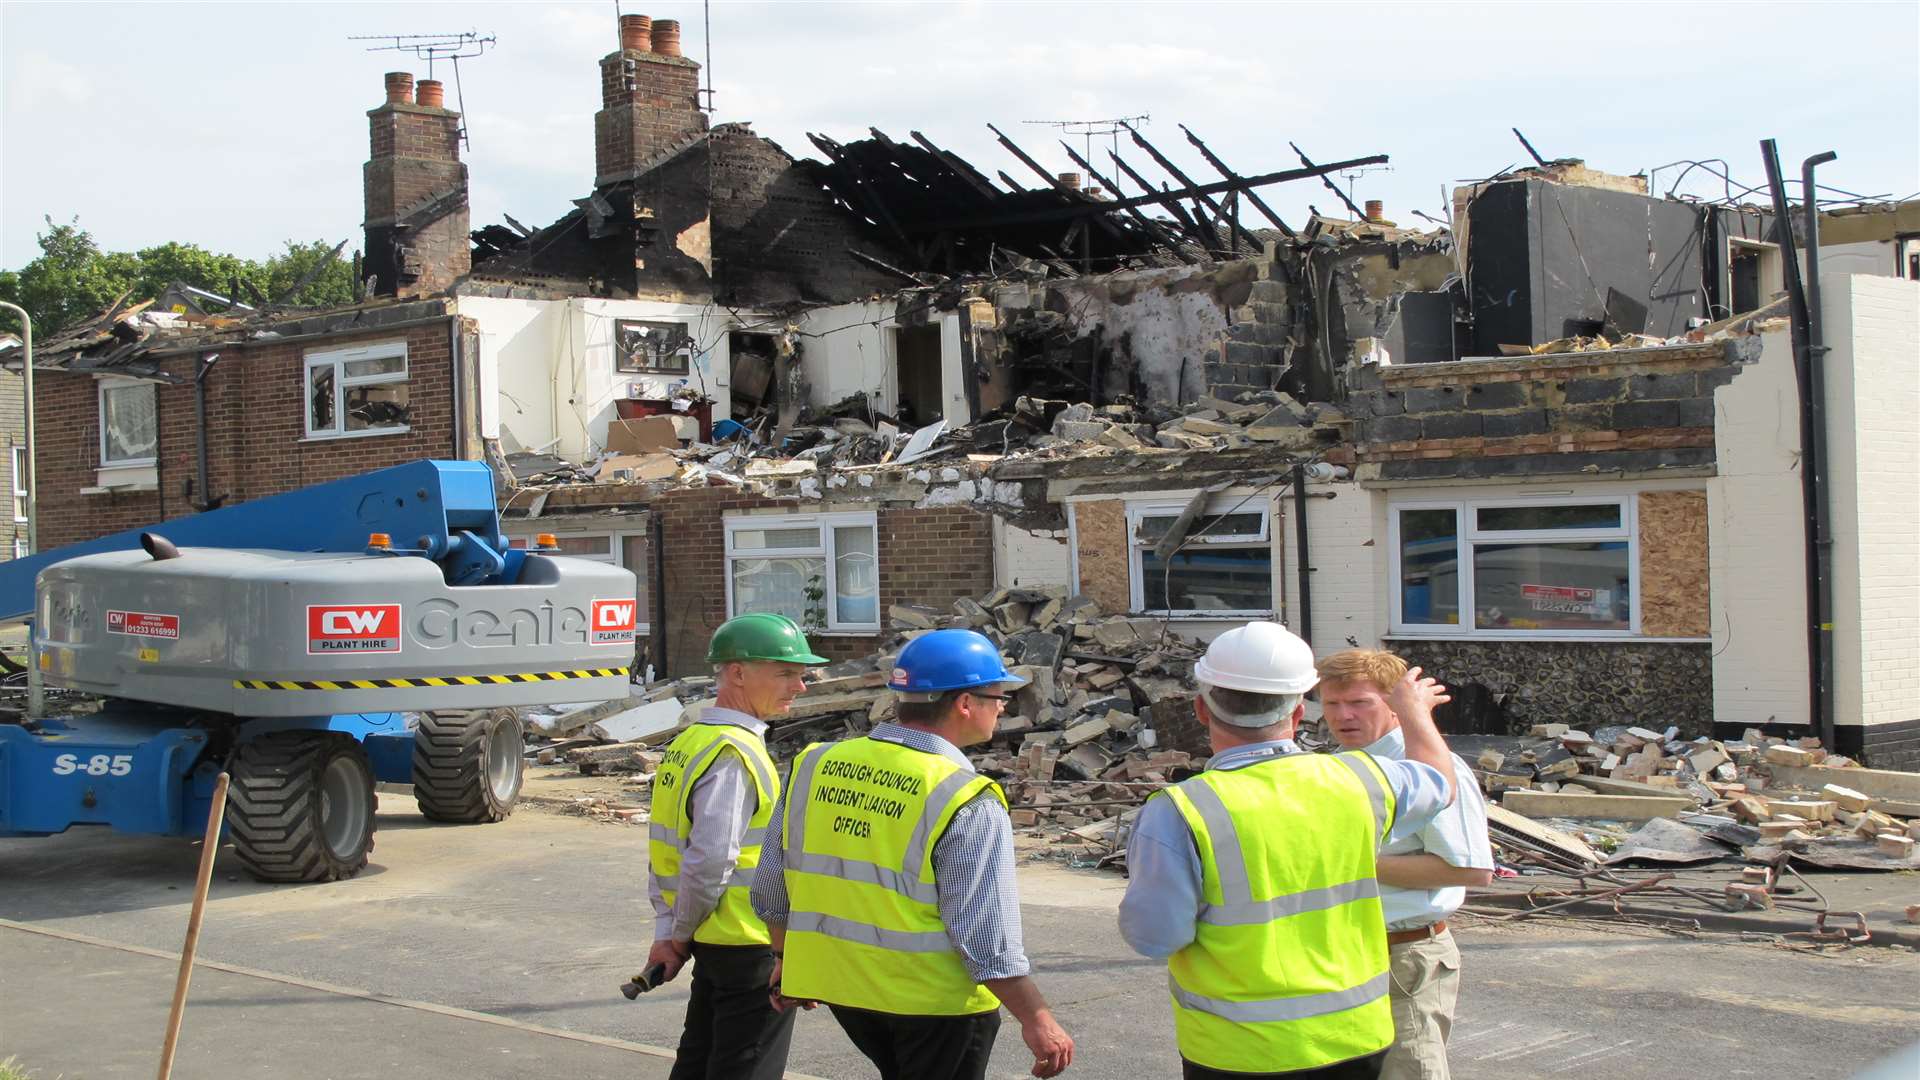 Engineers discuss the work to make safe the fire-ravaged homes in Little Knoll, South Ashford